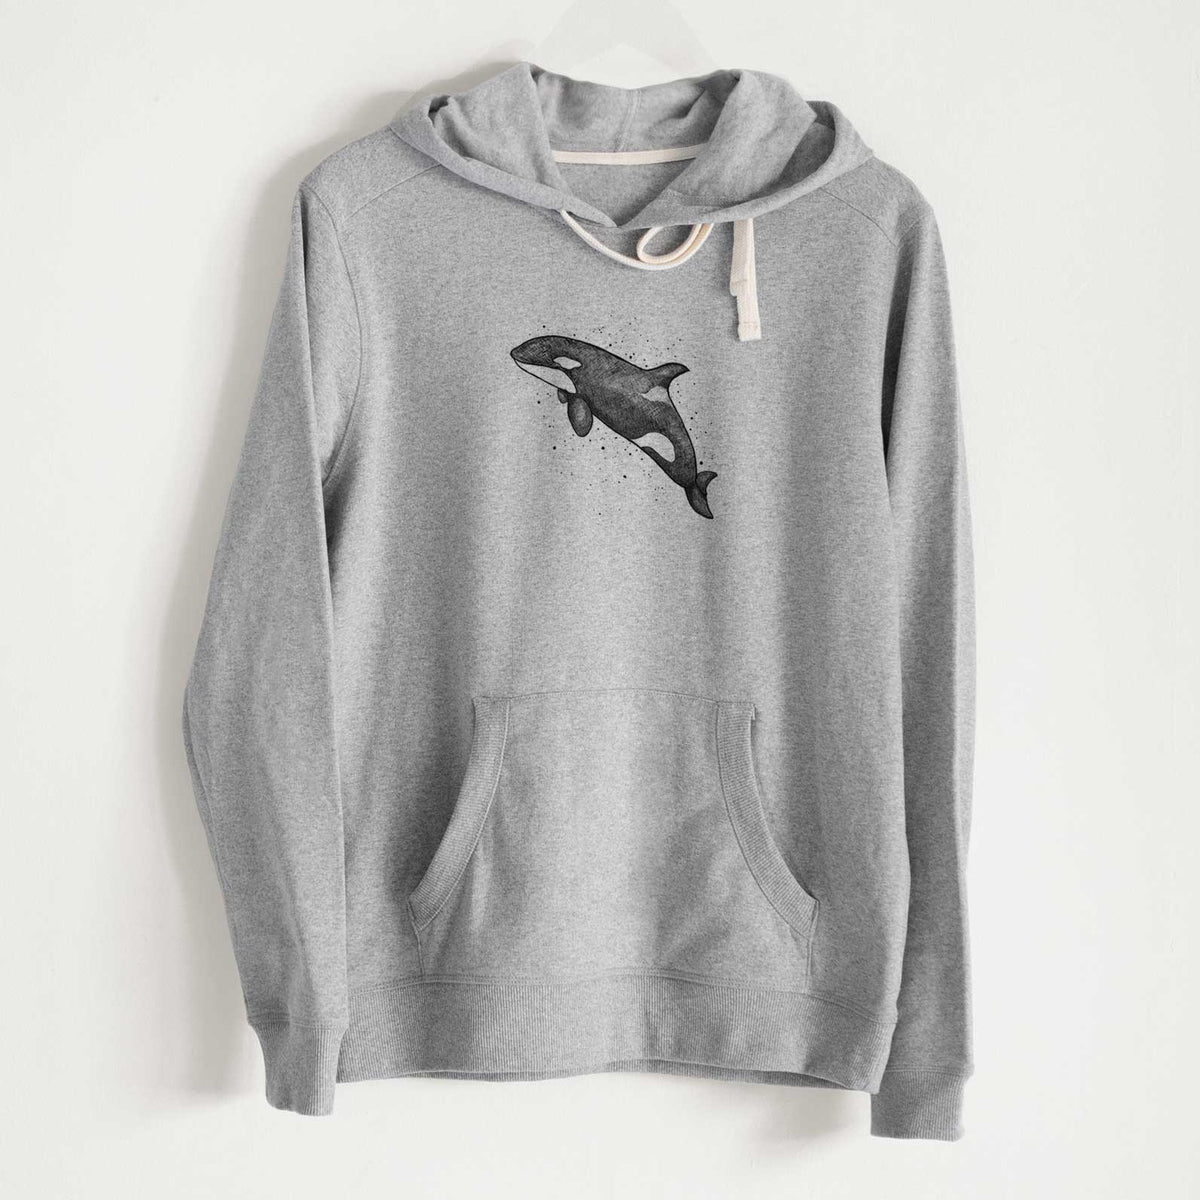 Orca Whale - Unisex Recycled Hoodie - CLOSEOUT - FINAL SALE